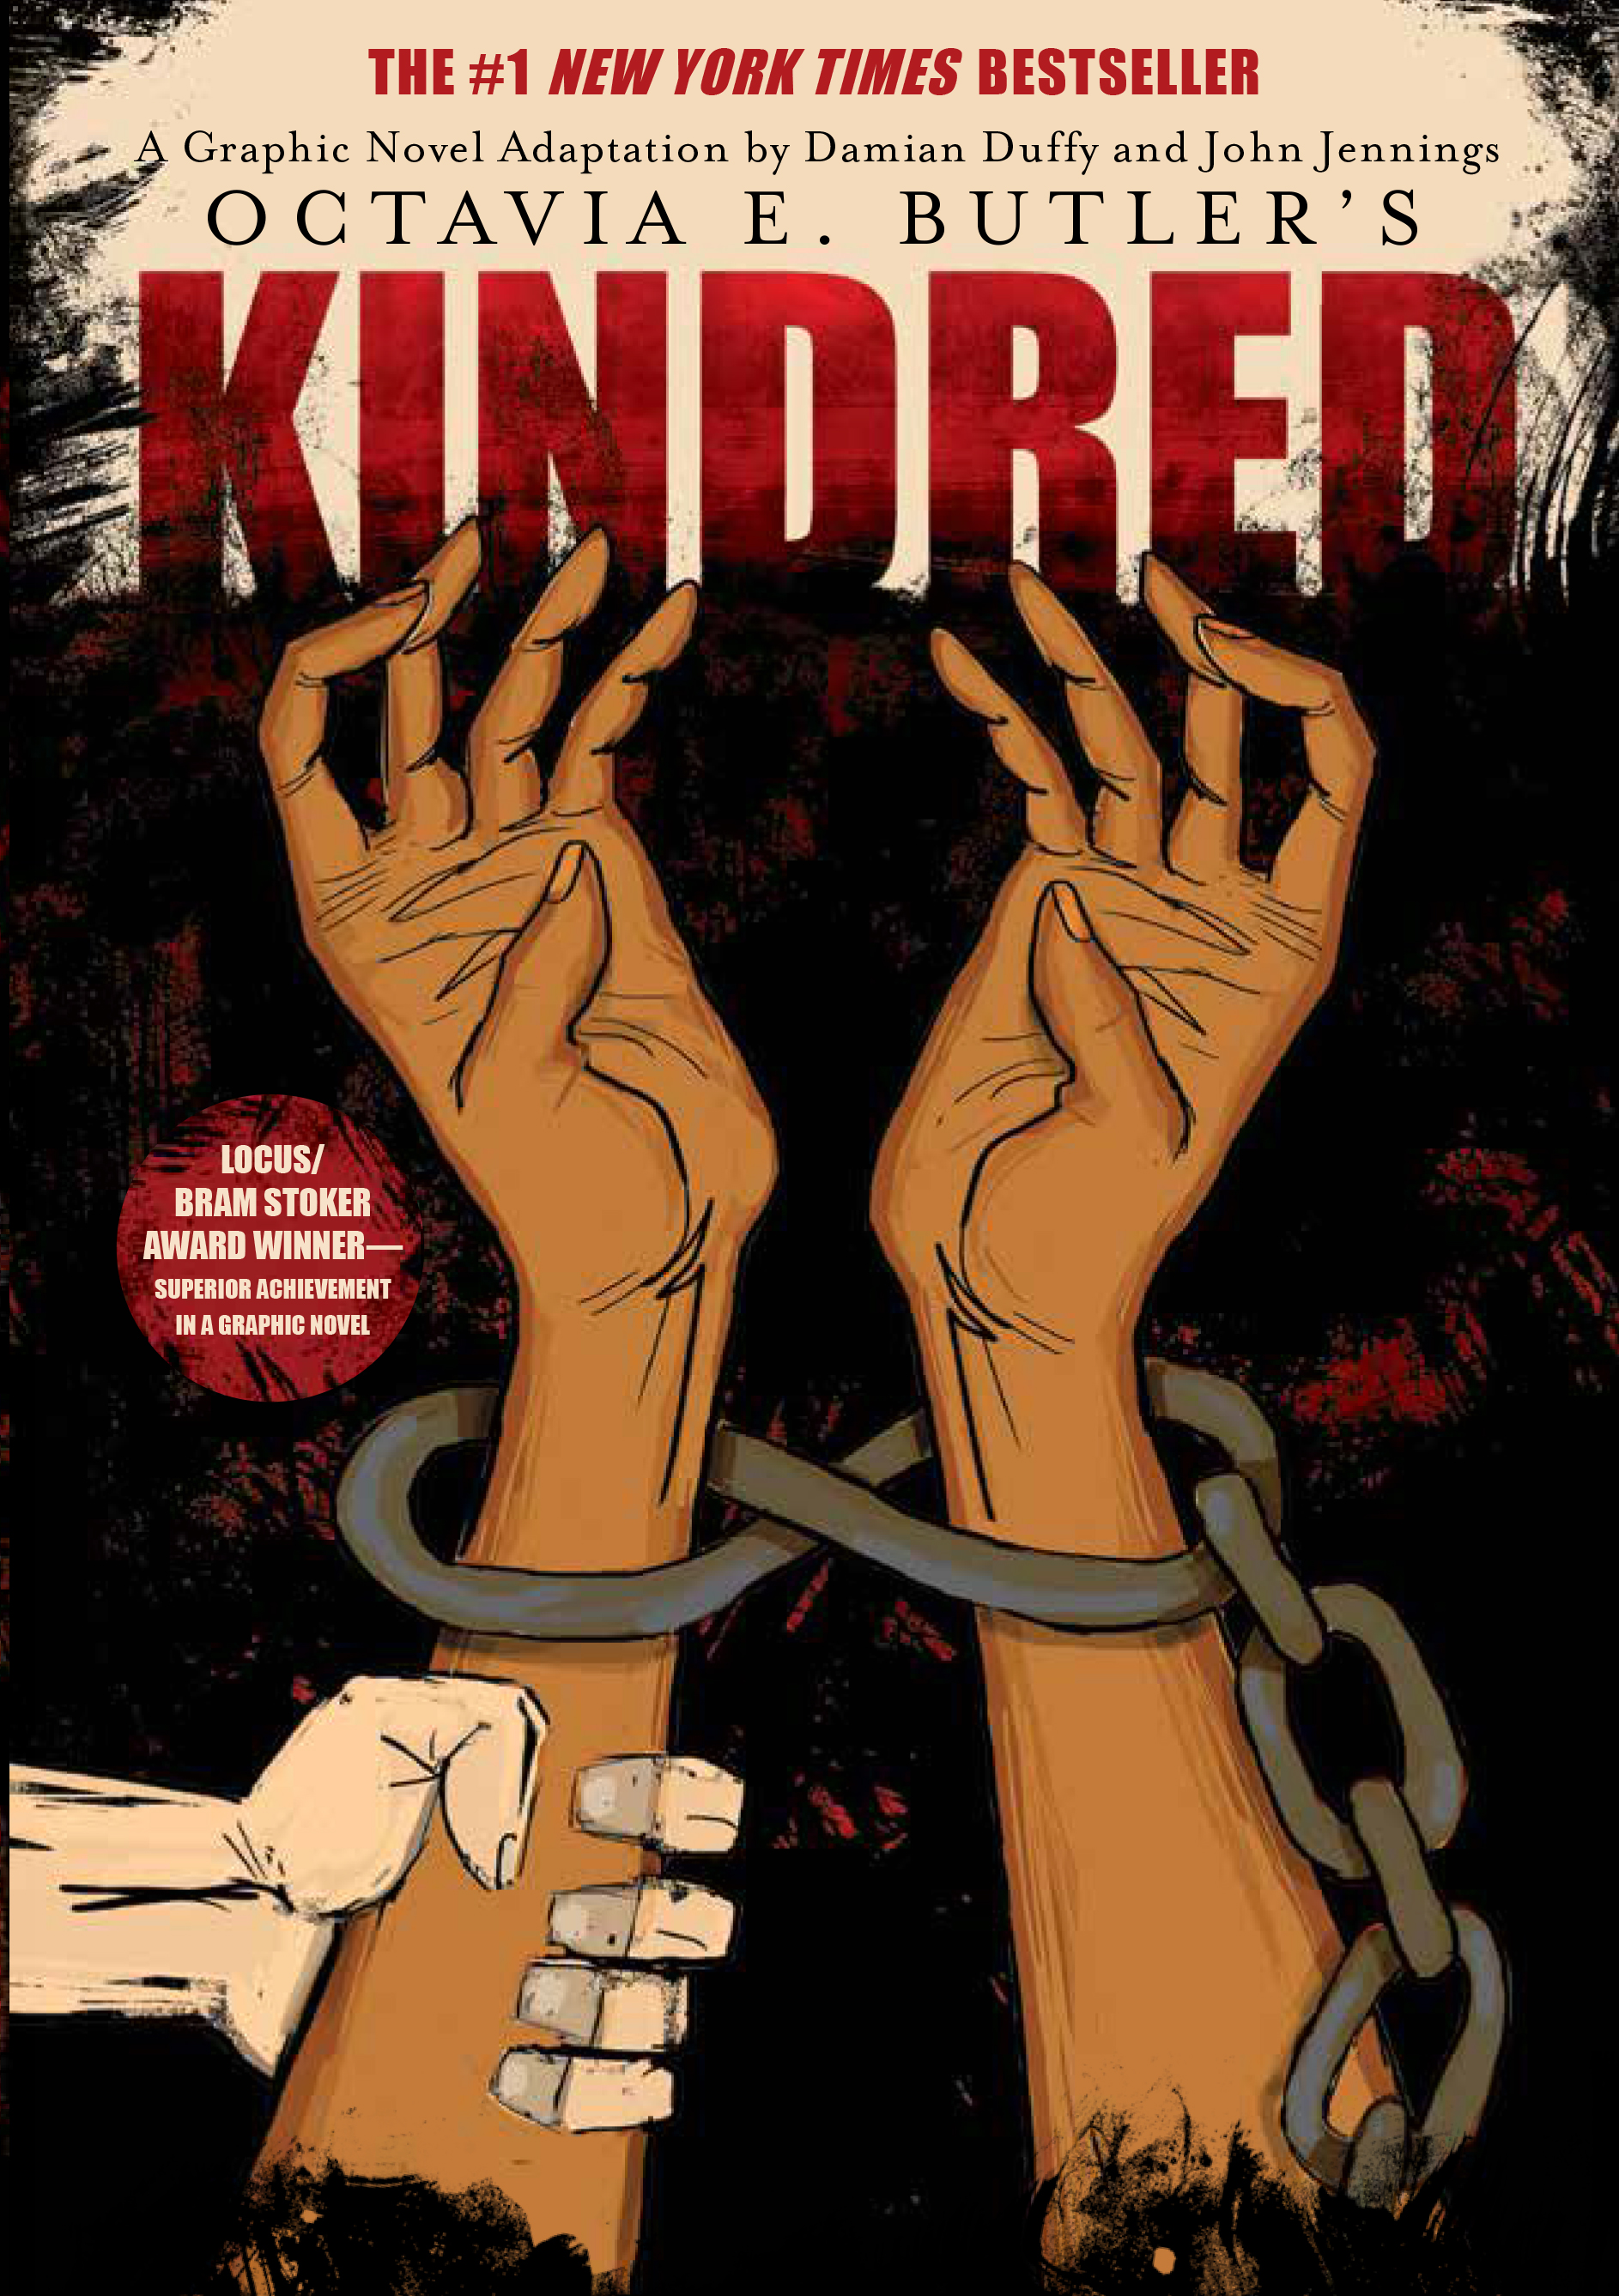 Image: The cover of “Kindred: A Graphic Novel Adaptation” features two brown arms reaching upward, with chains around the wrists against a black and red backdrop. A white hand grabs the left arm. Image courtesy of Damian Duffy.